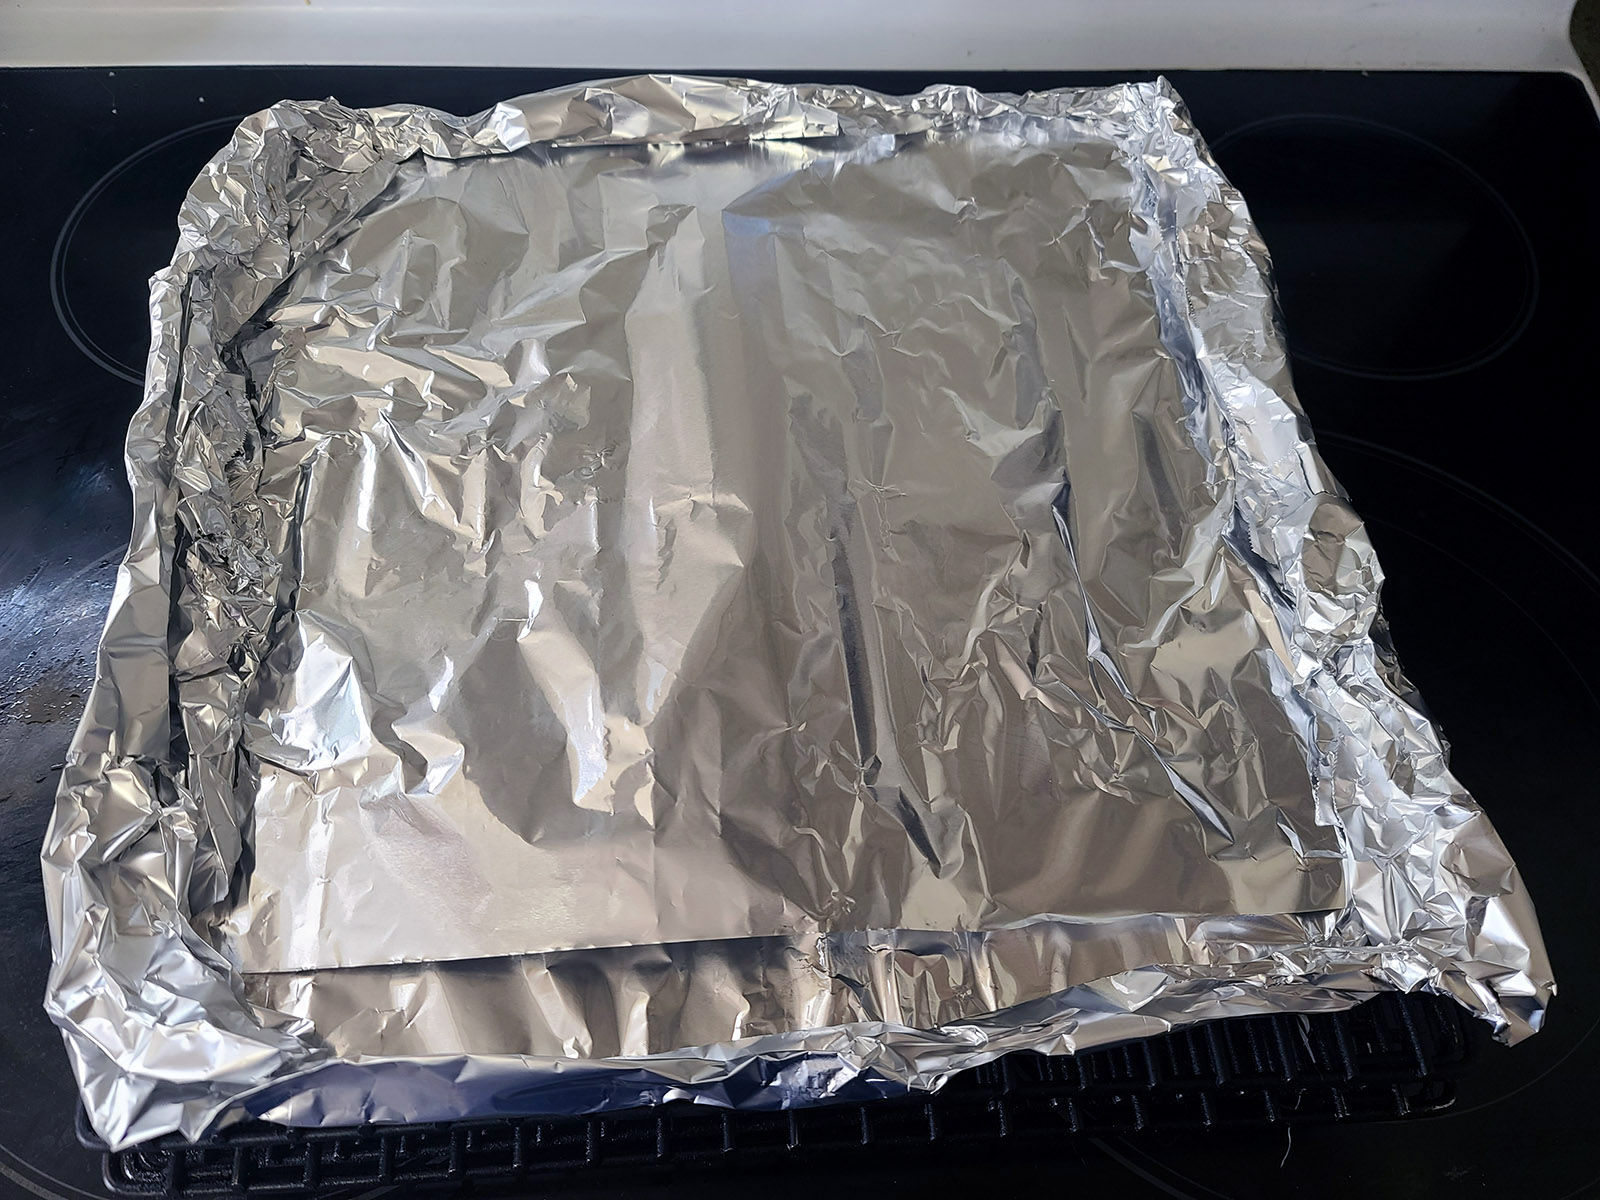 The smoking rack covered in foil.